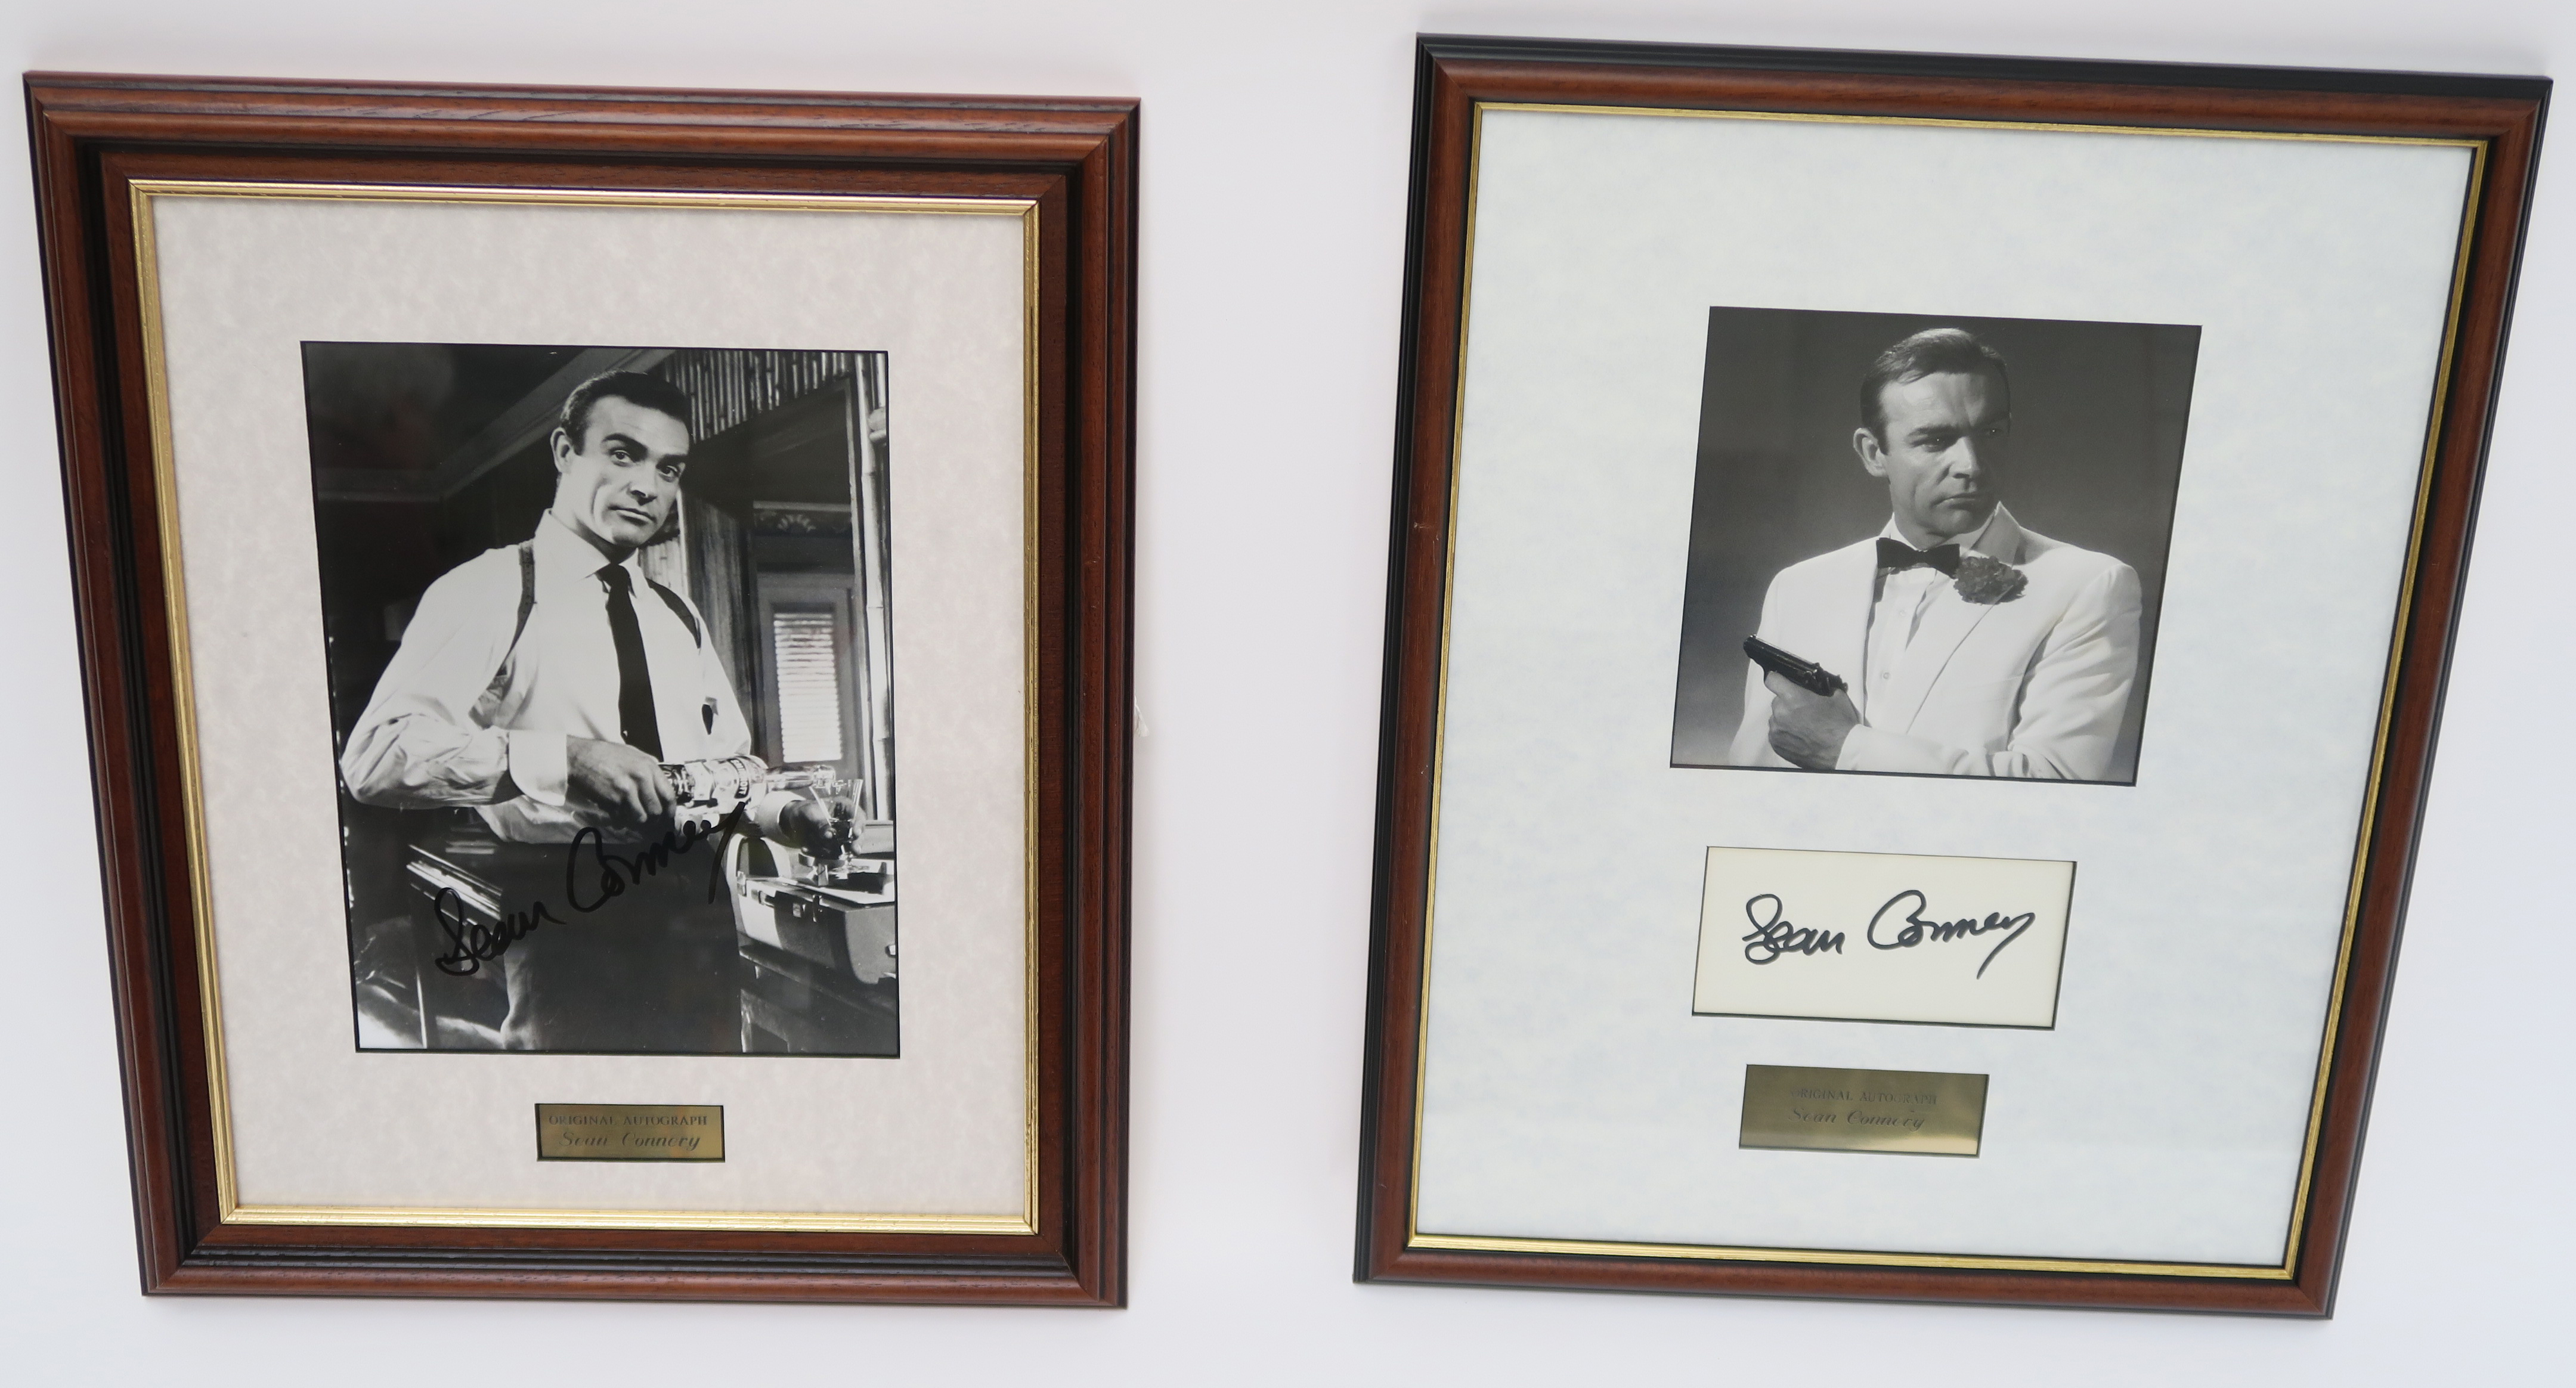 Two Sean Connery autographs, one on his photo and one under photo with C.O.A. on reverse.